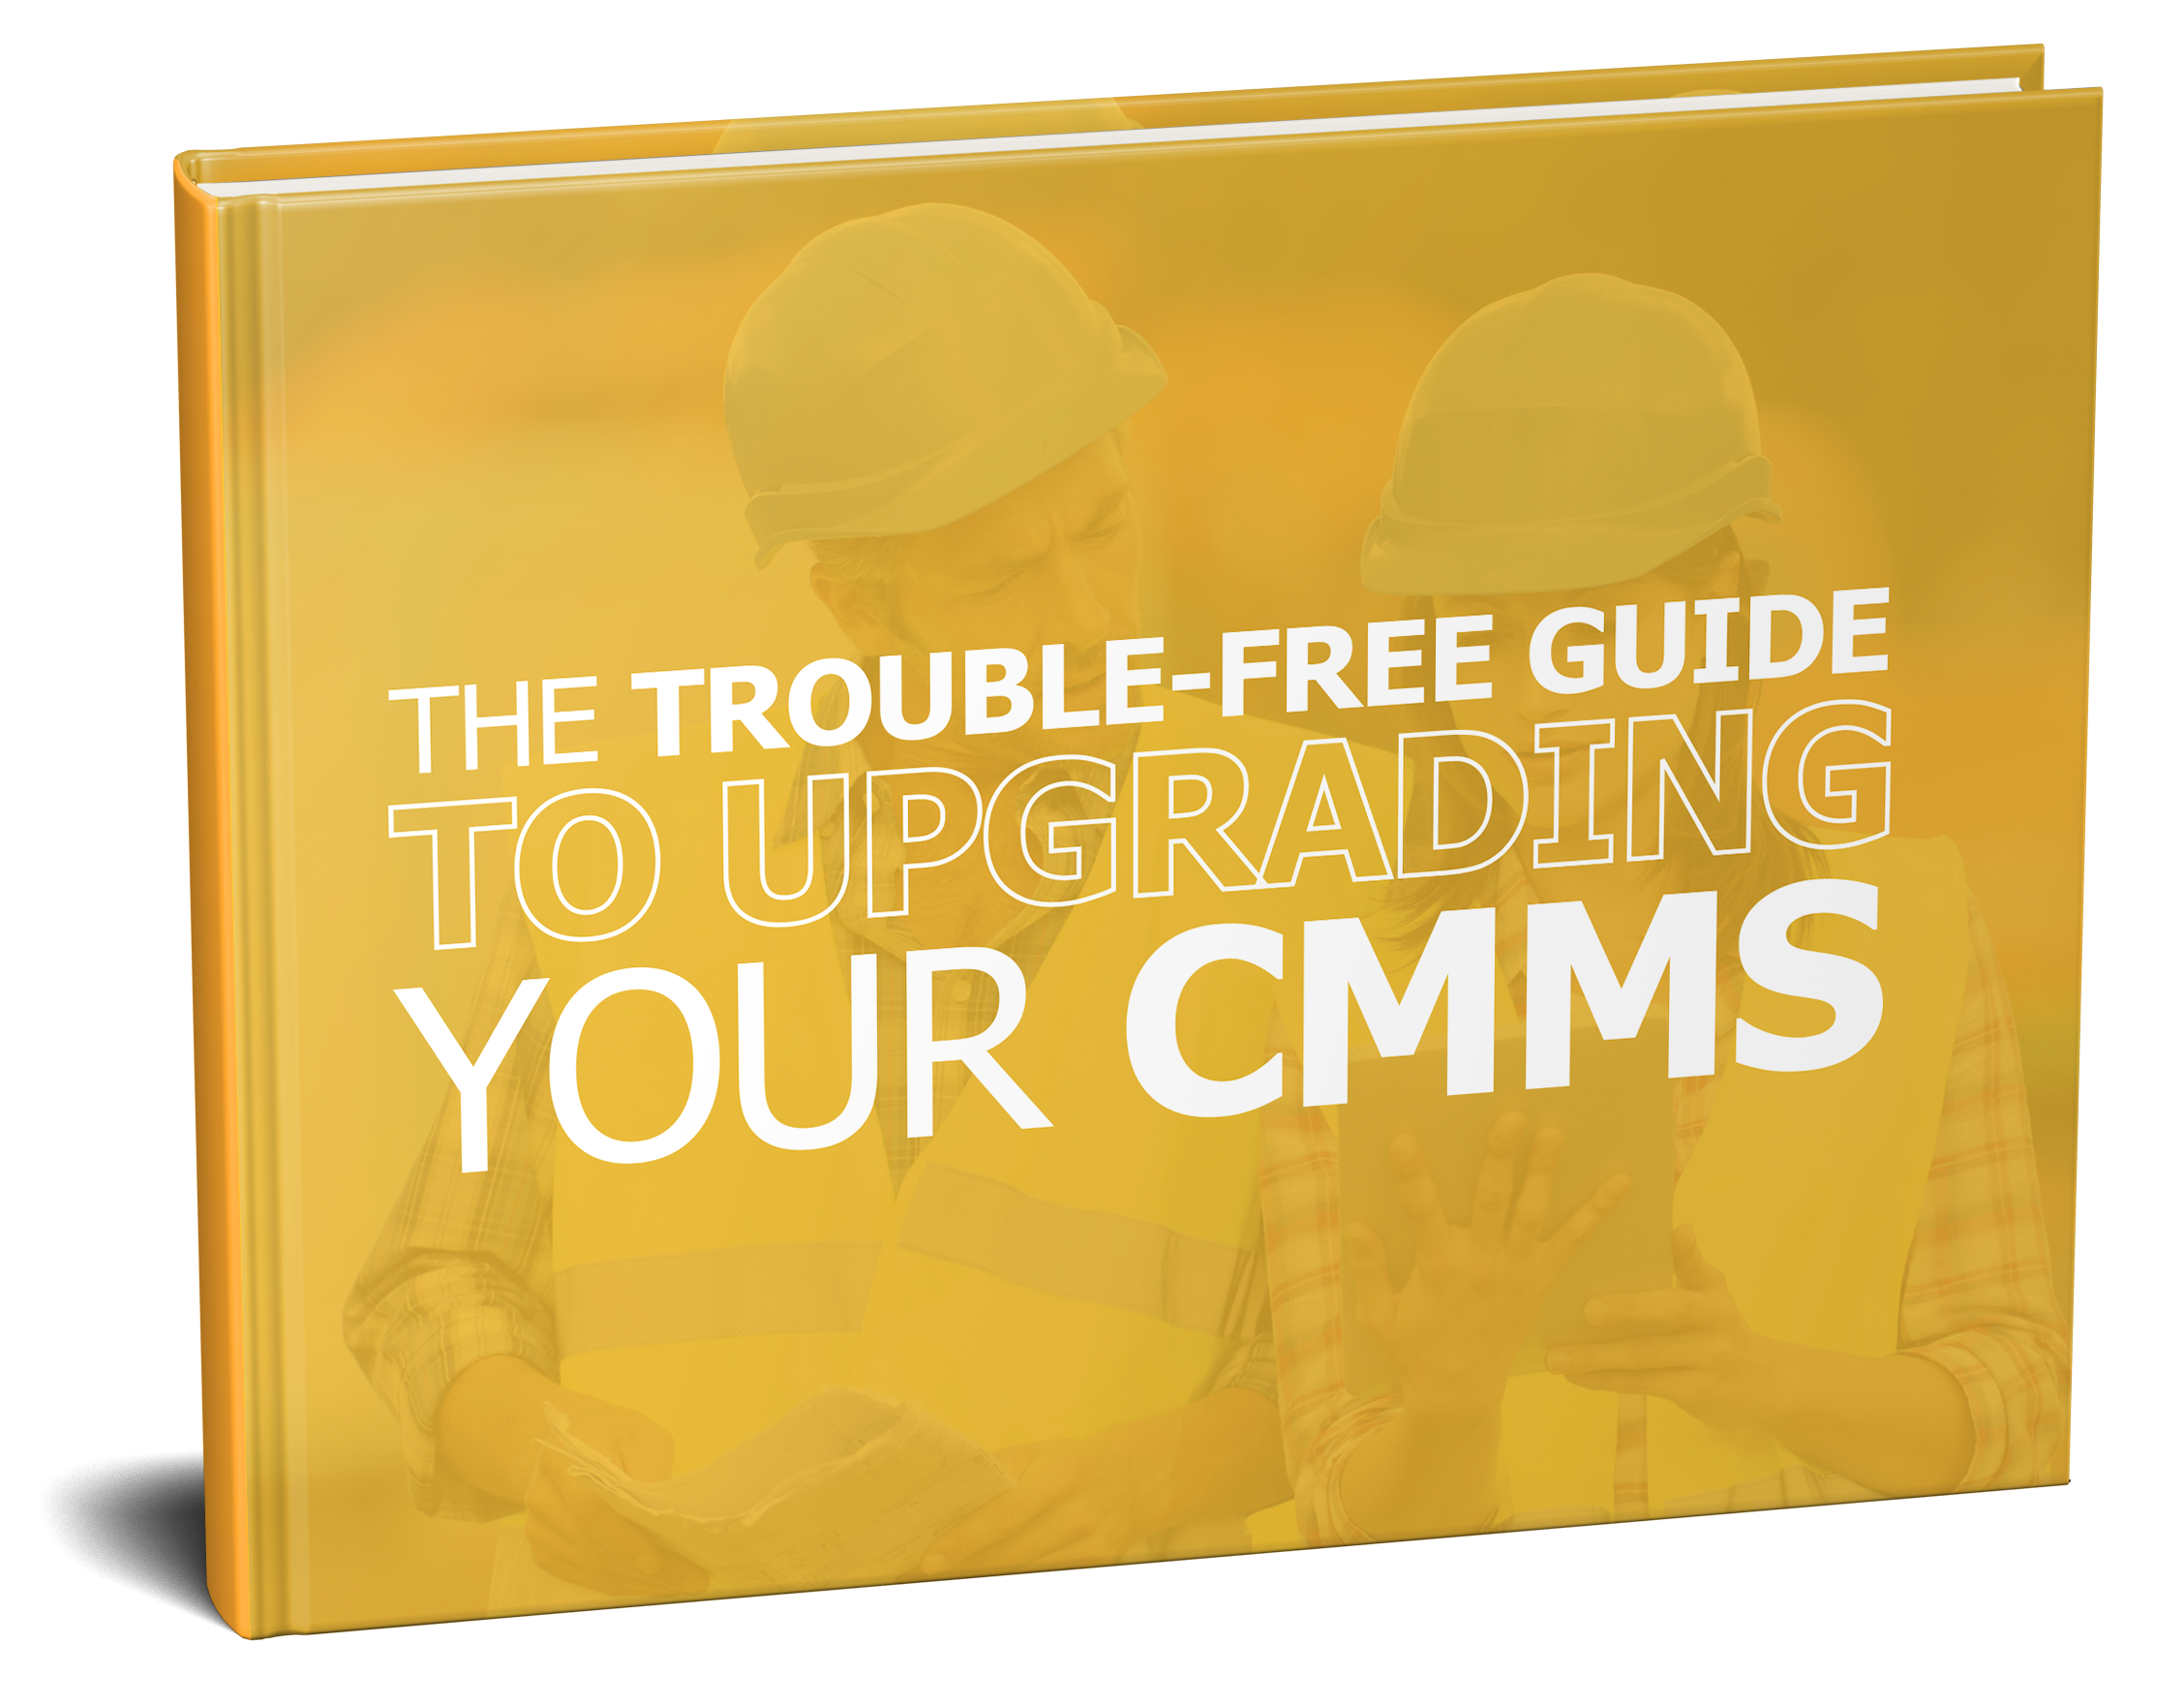 The Trouble-Free Guide to Upgrading Your CMMS